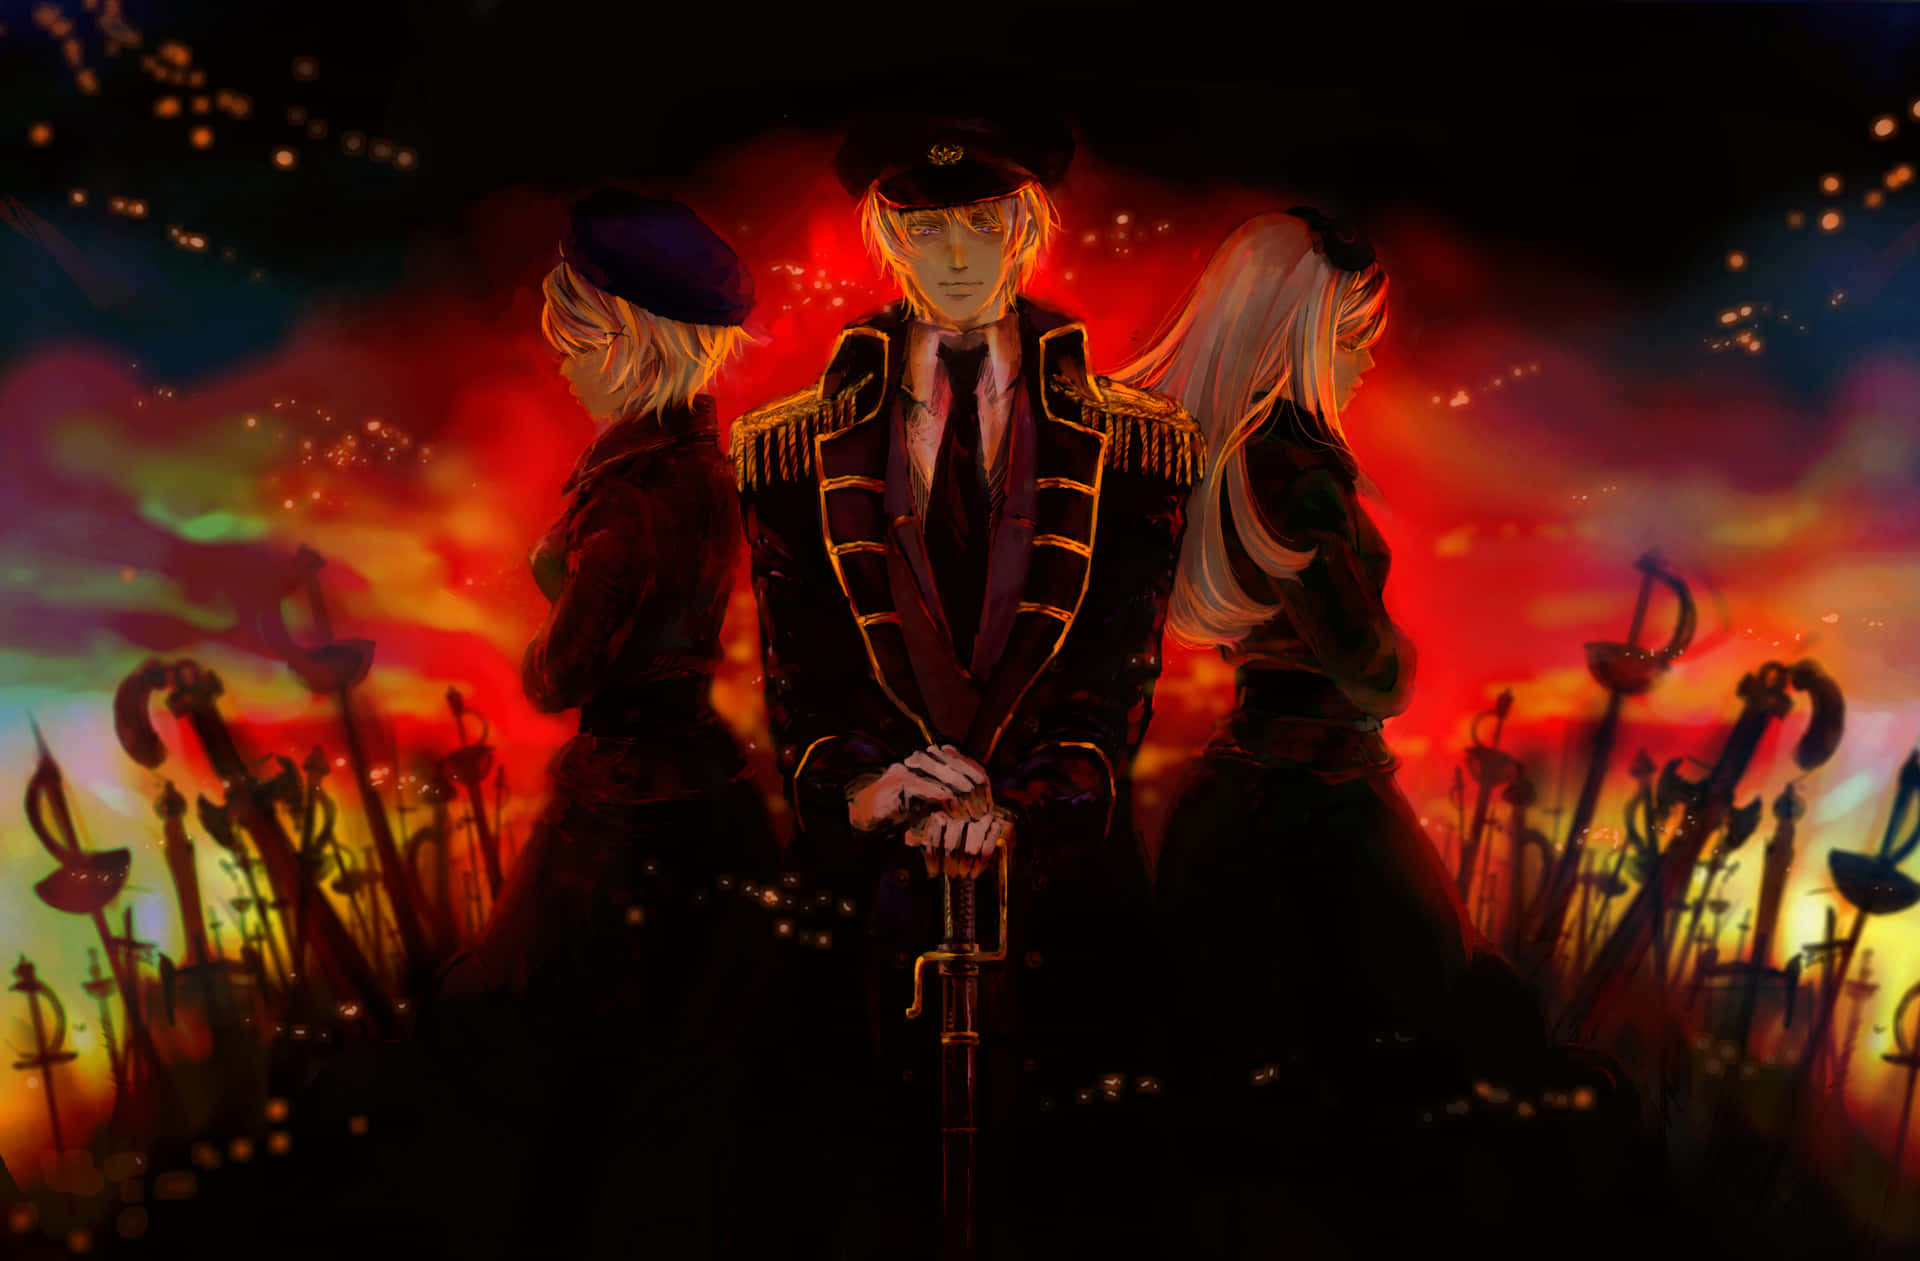 The Axis Powers on Parade Wallpaper